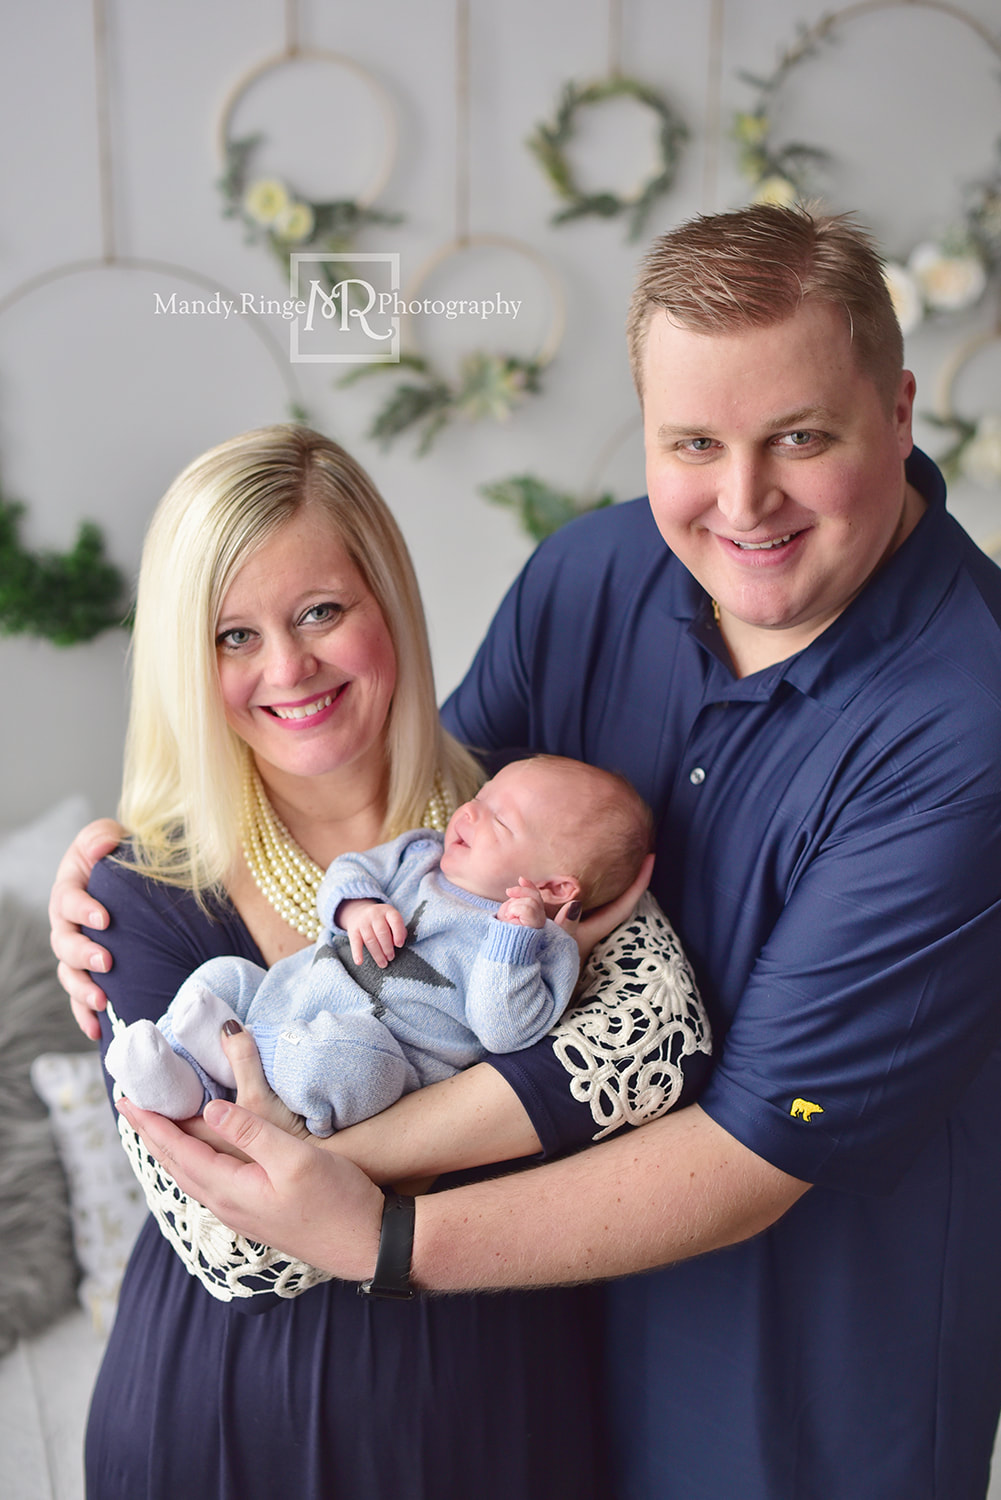 Newborn family portrait // baby boy, family of 3, floral hoop wall, blue // St. Charles, IL studio // by Mandy Ringe Photography